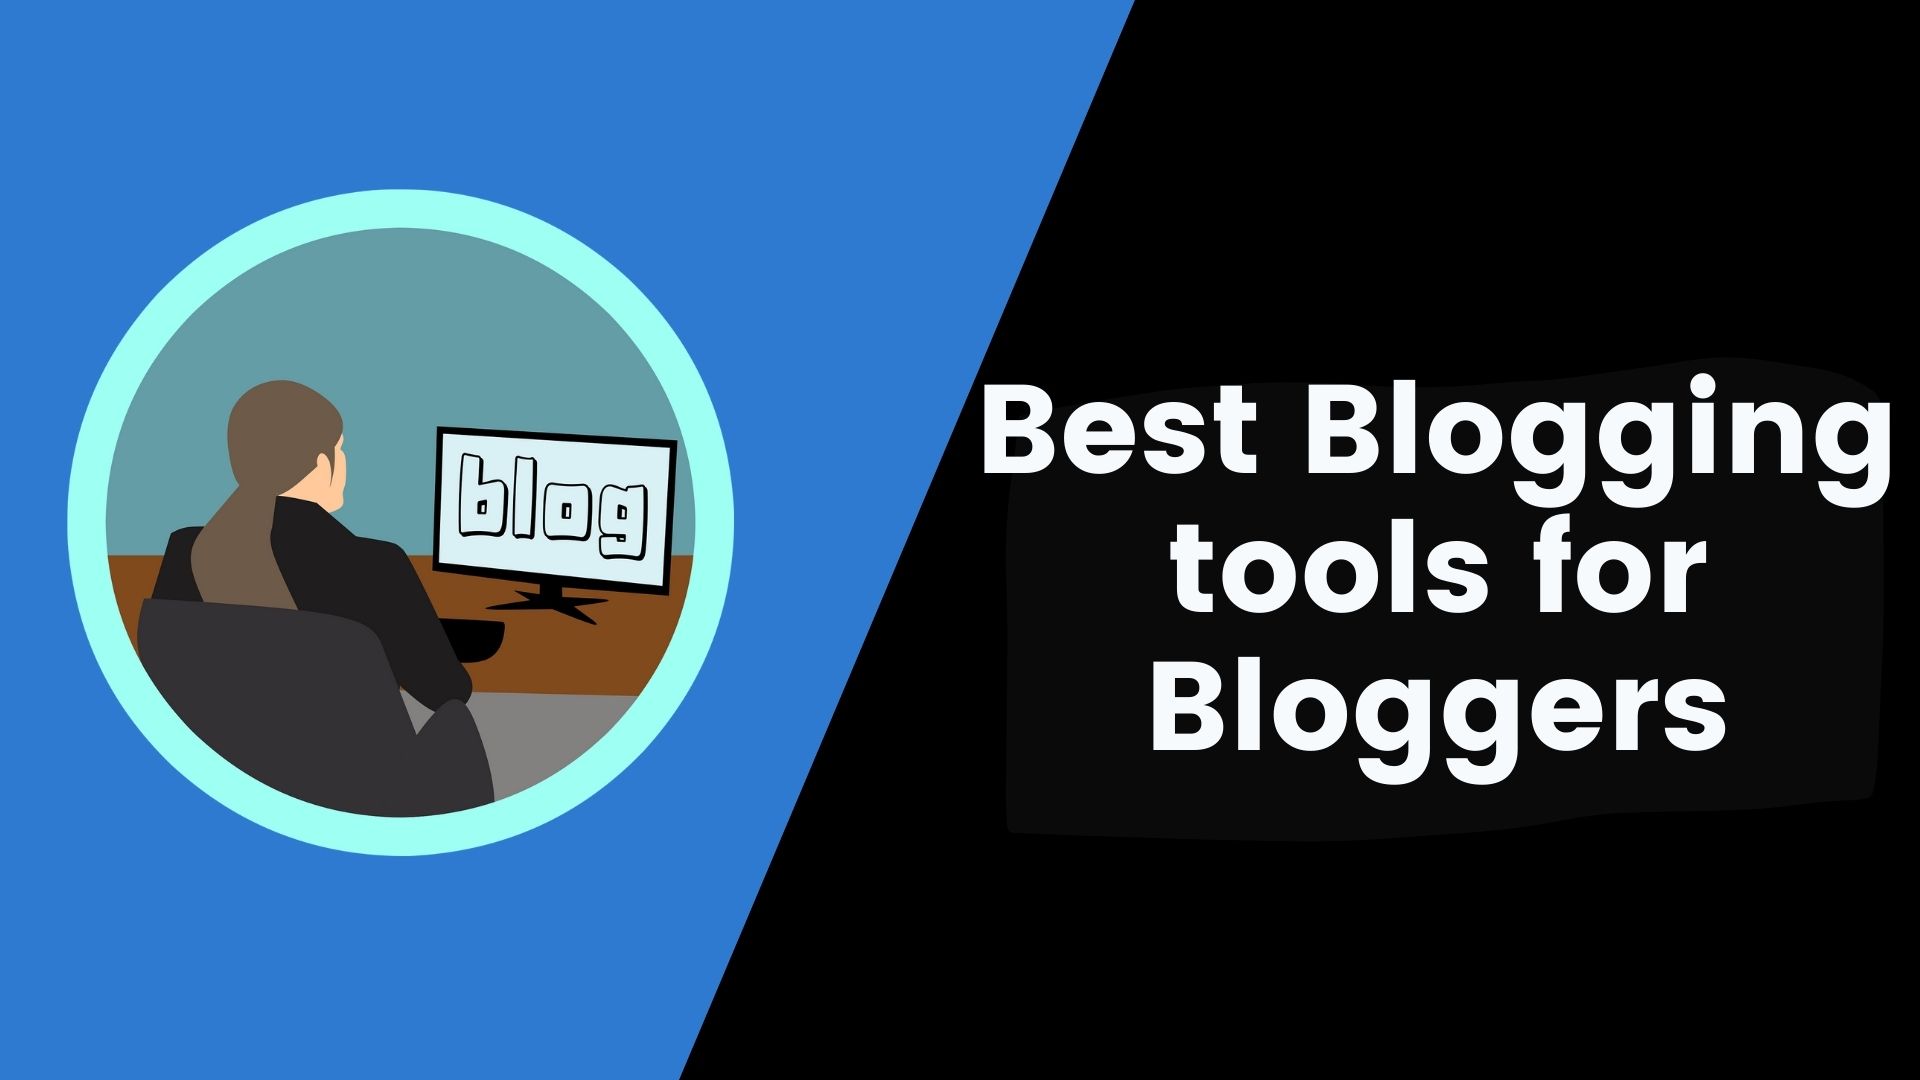 Best Blogging tools for bloggers in 2020